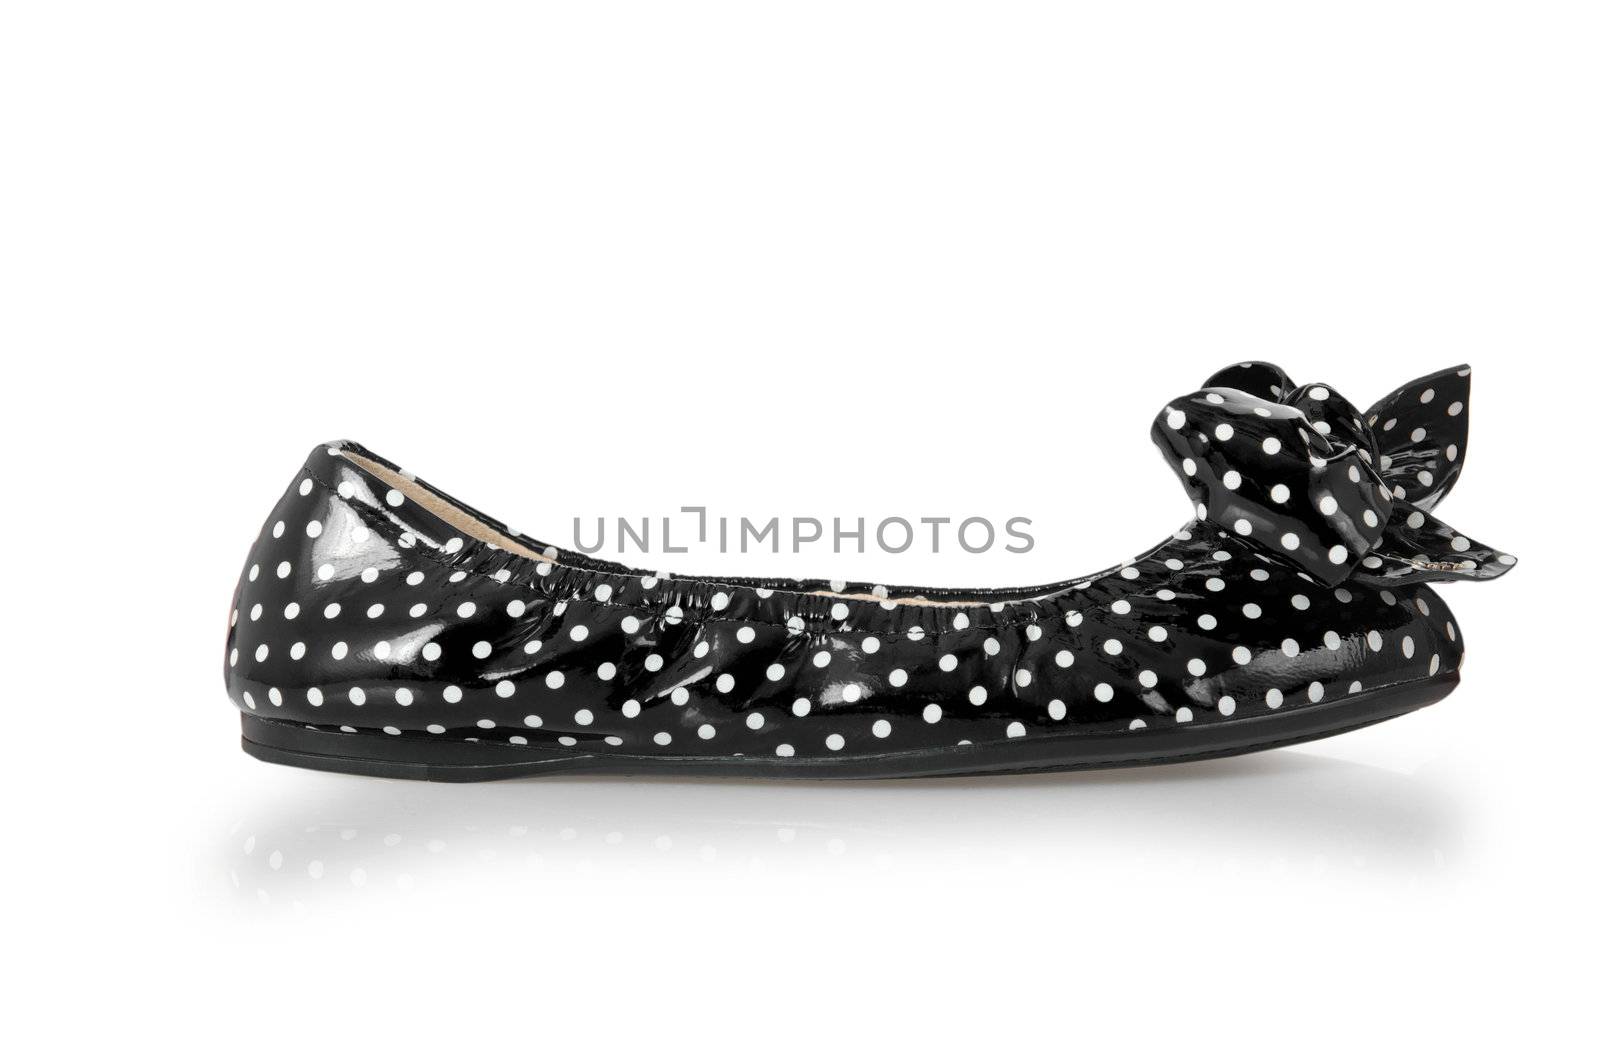 Flat shoes isolated on white